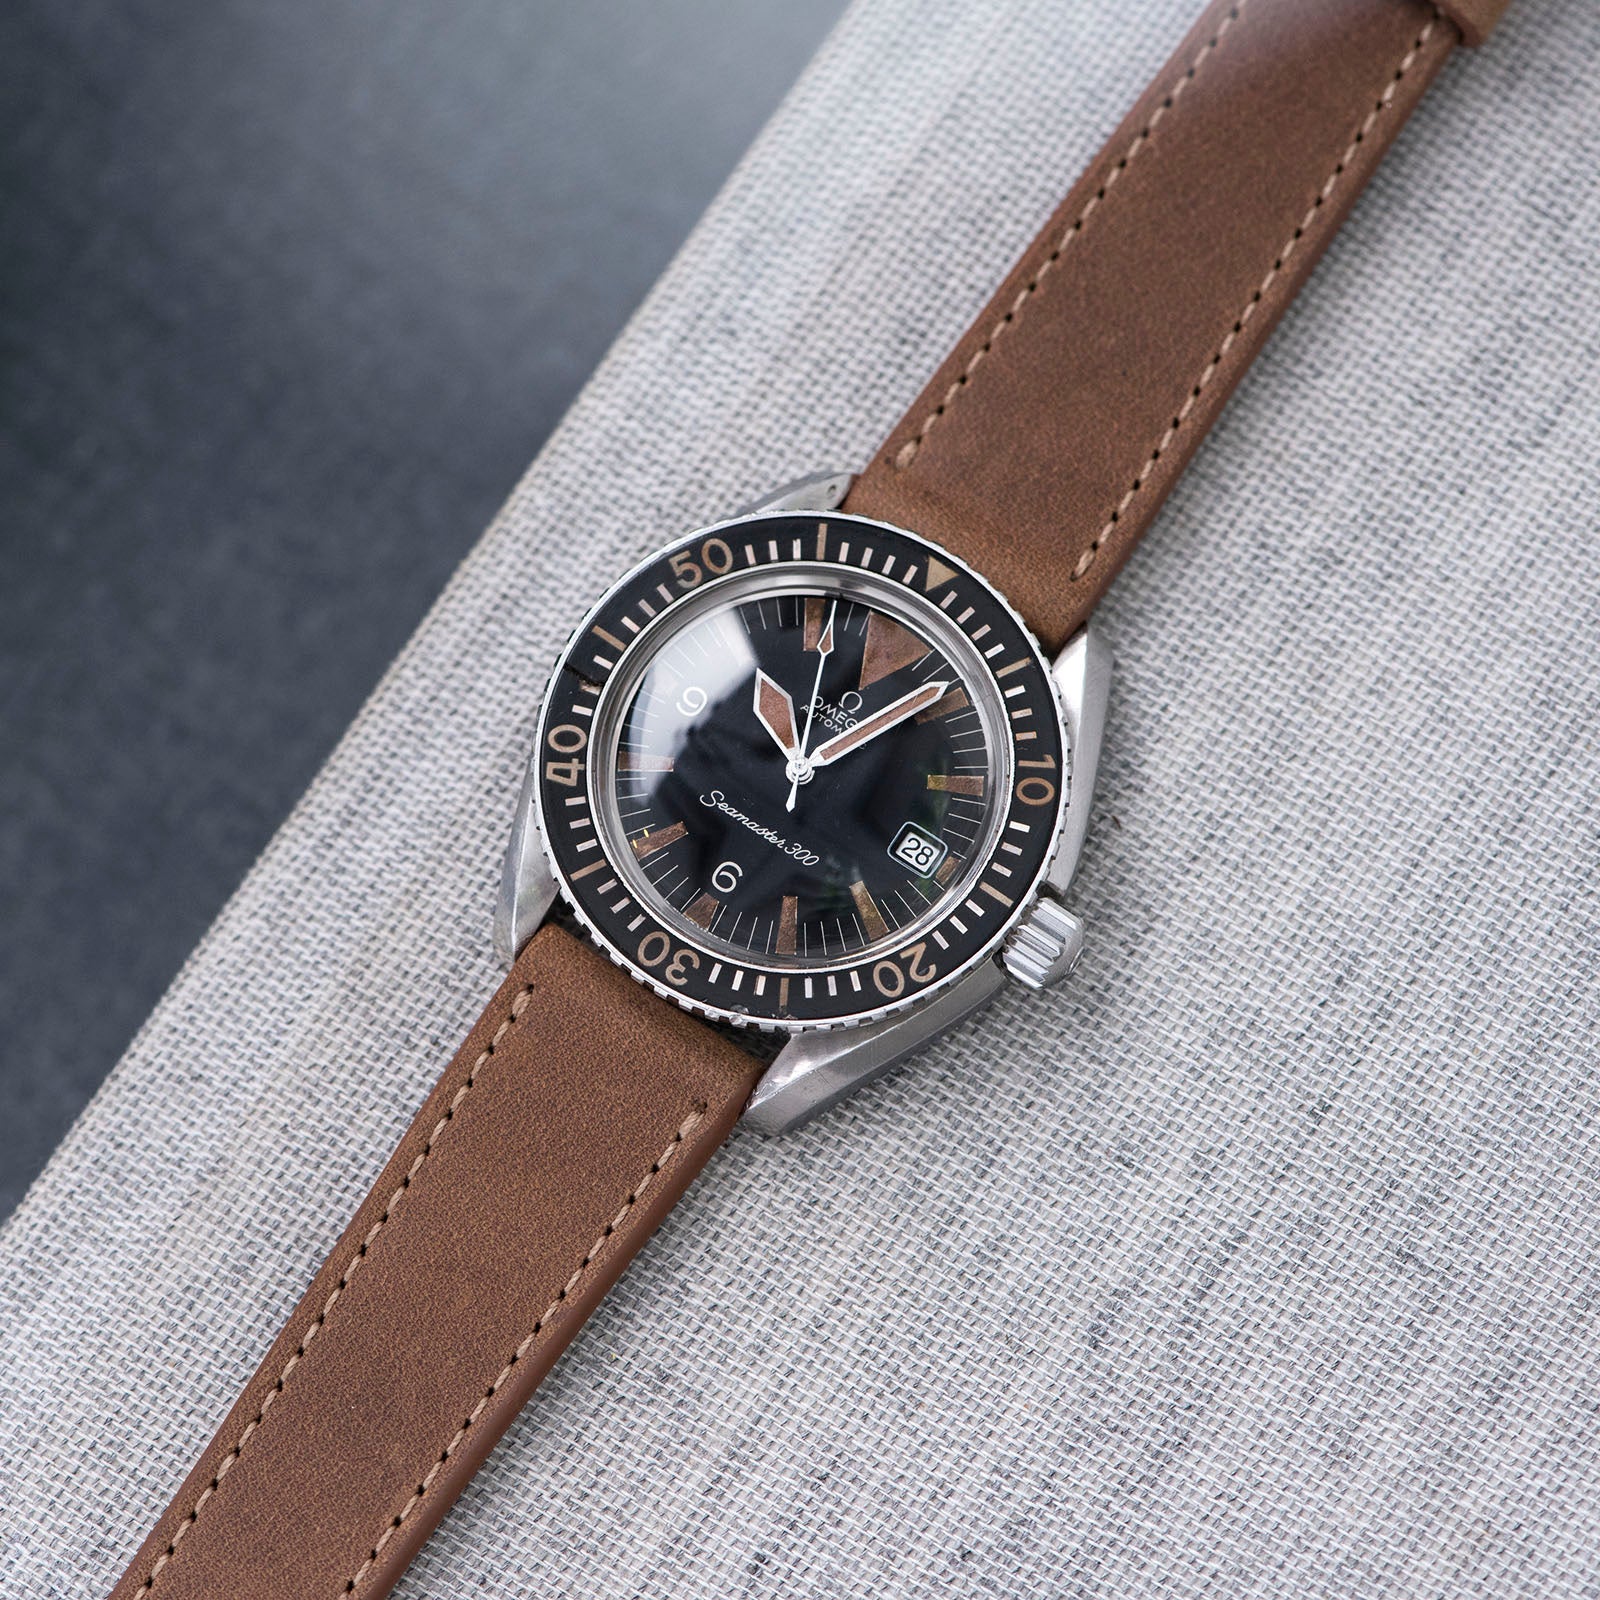 Bulang and Sons_Strap Guide_The omega SM 300 Seamaster_Cinnamon Brown Leather Watch Strap